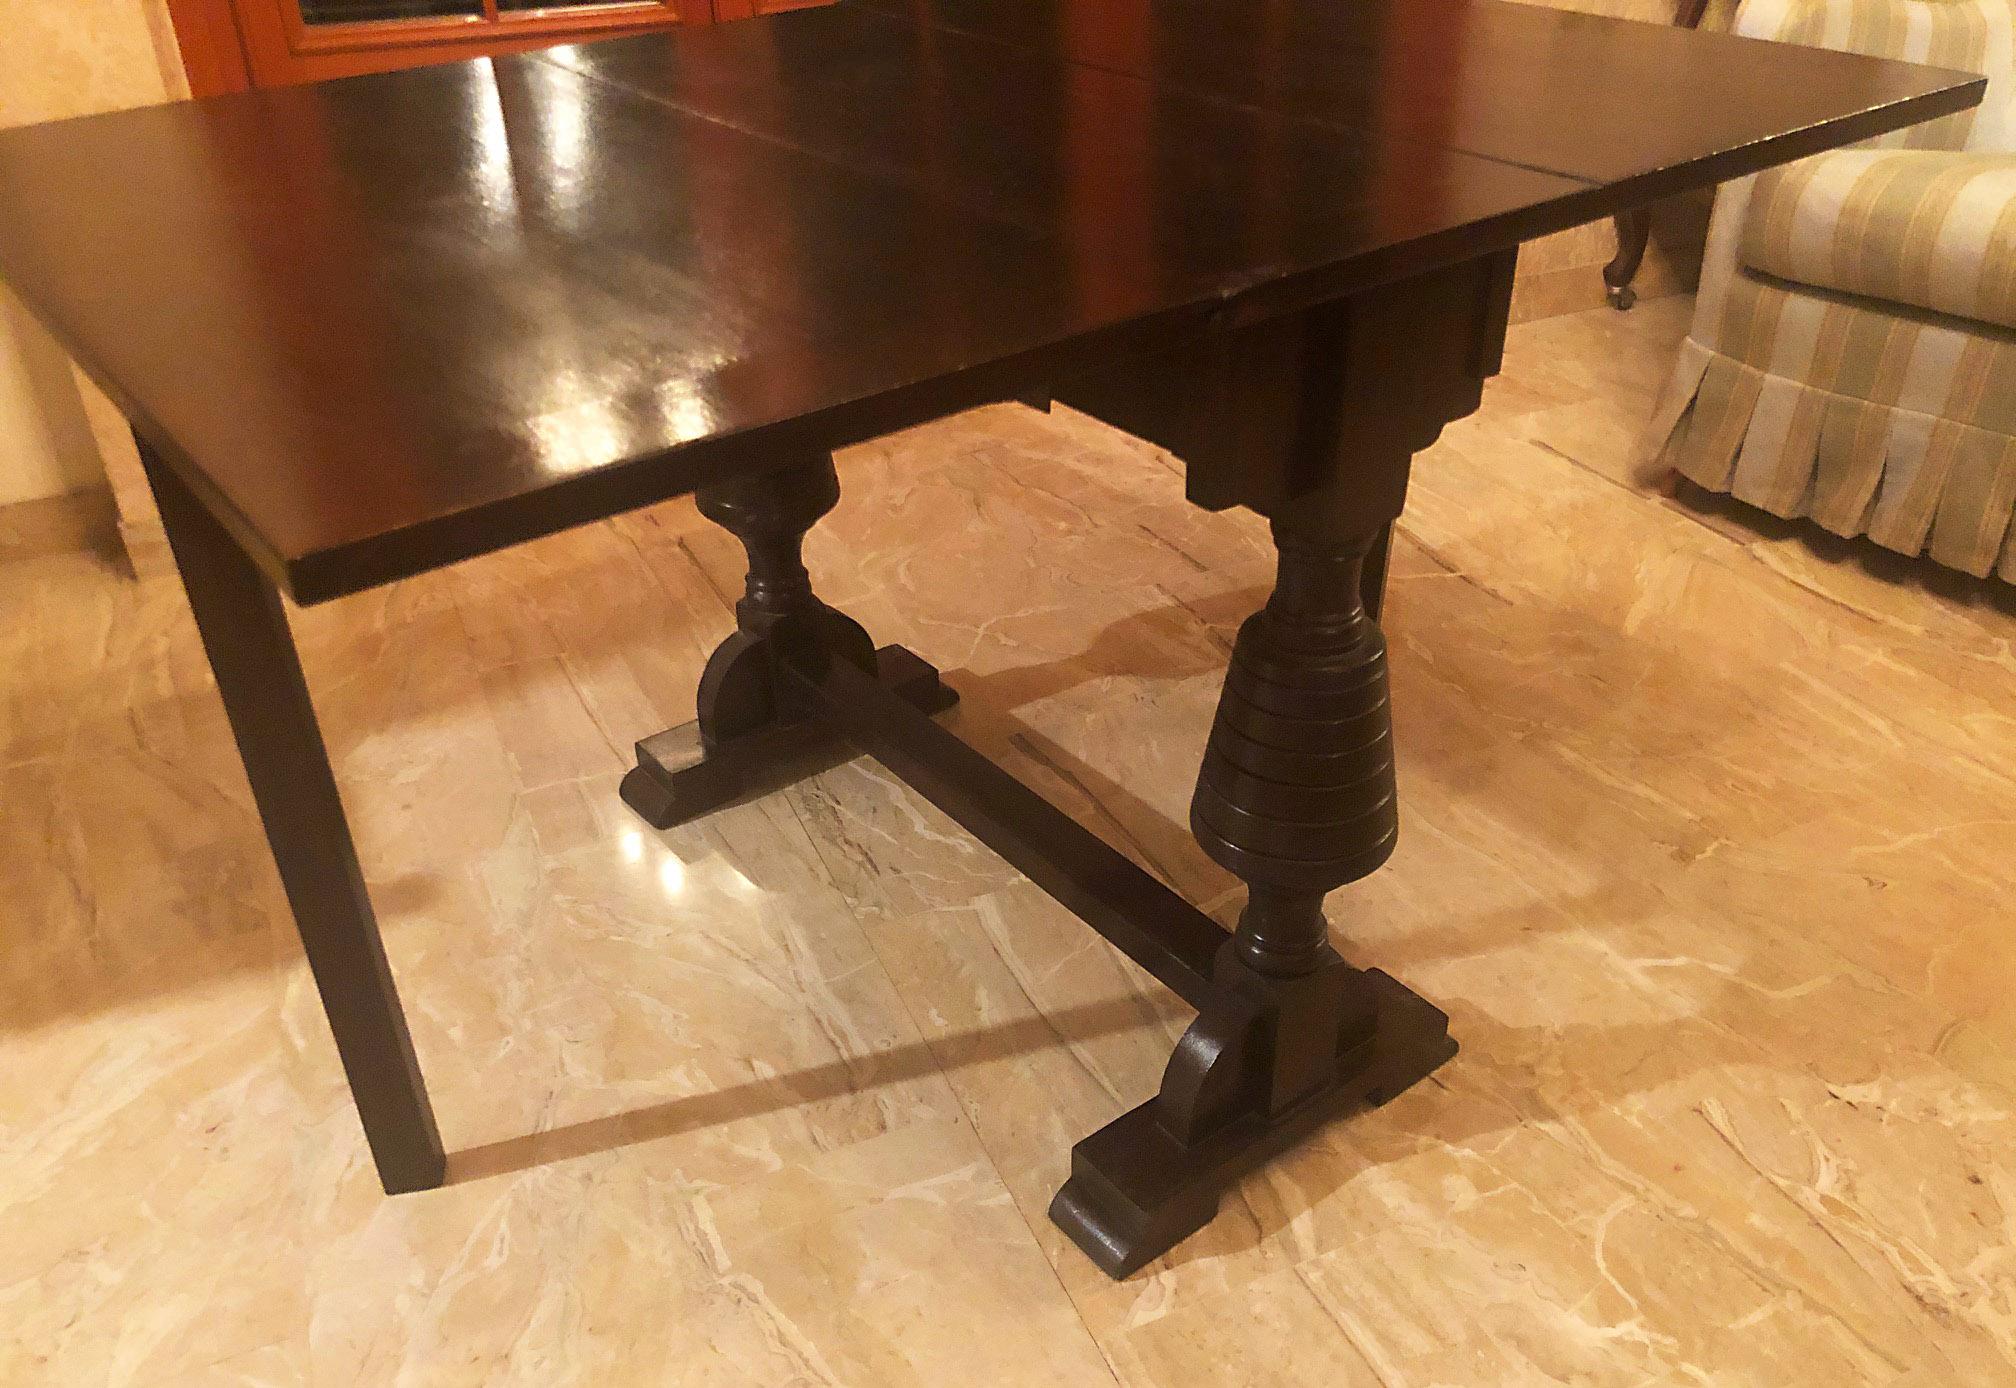 Country  Original  solid Oak Strip Table, Beautiful as a Console Table, Dark Color For Sale